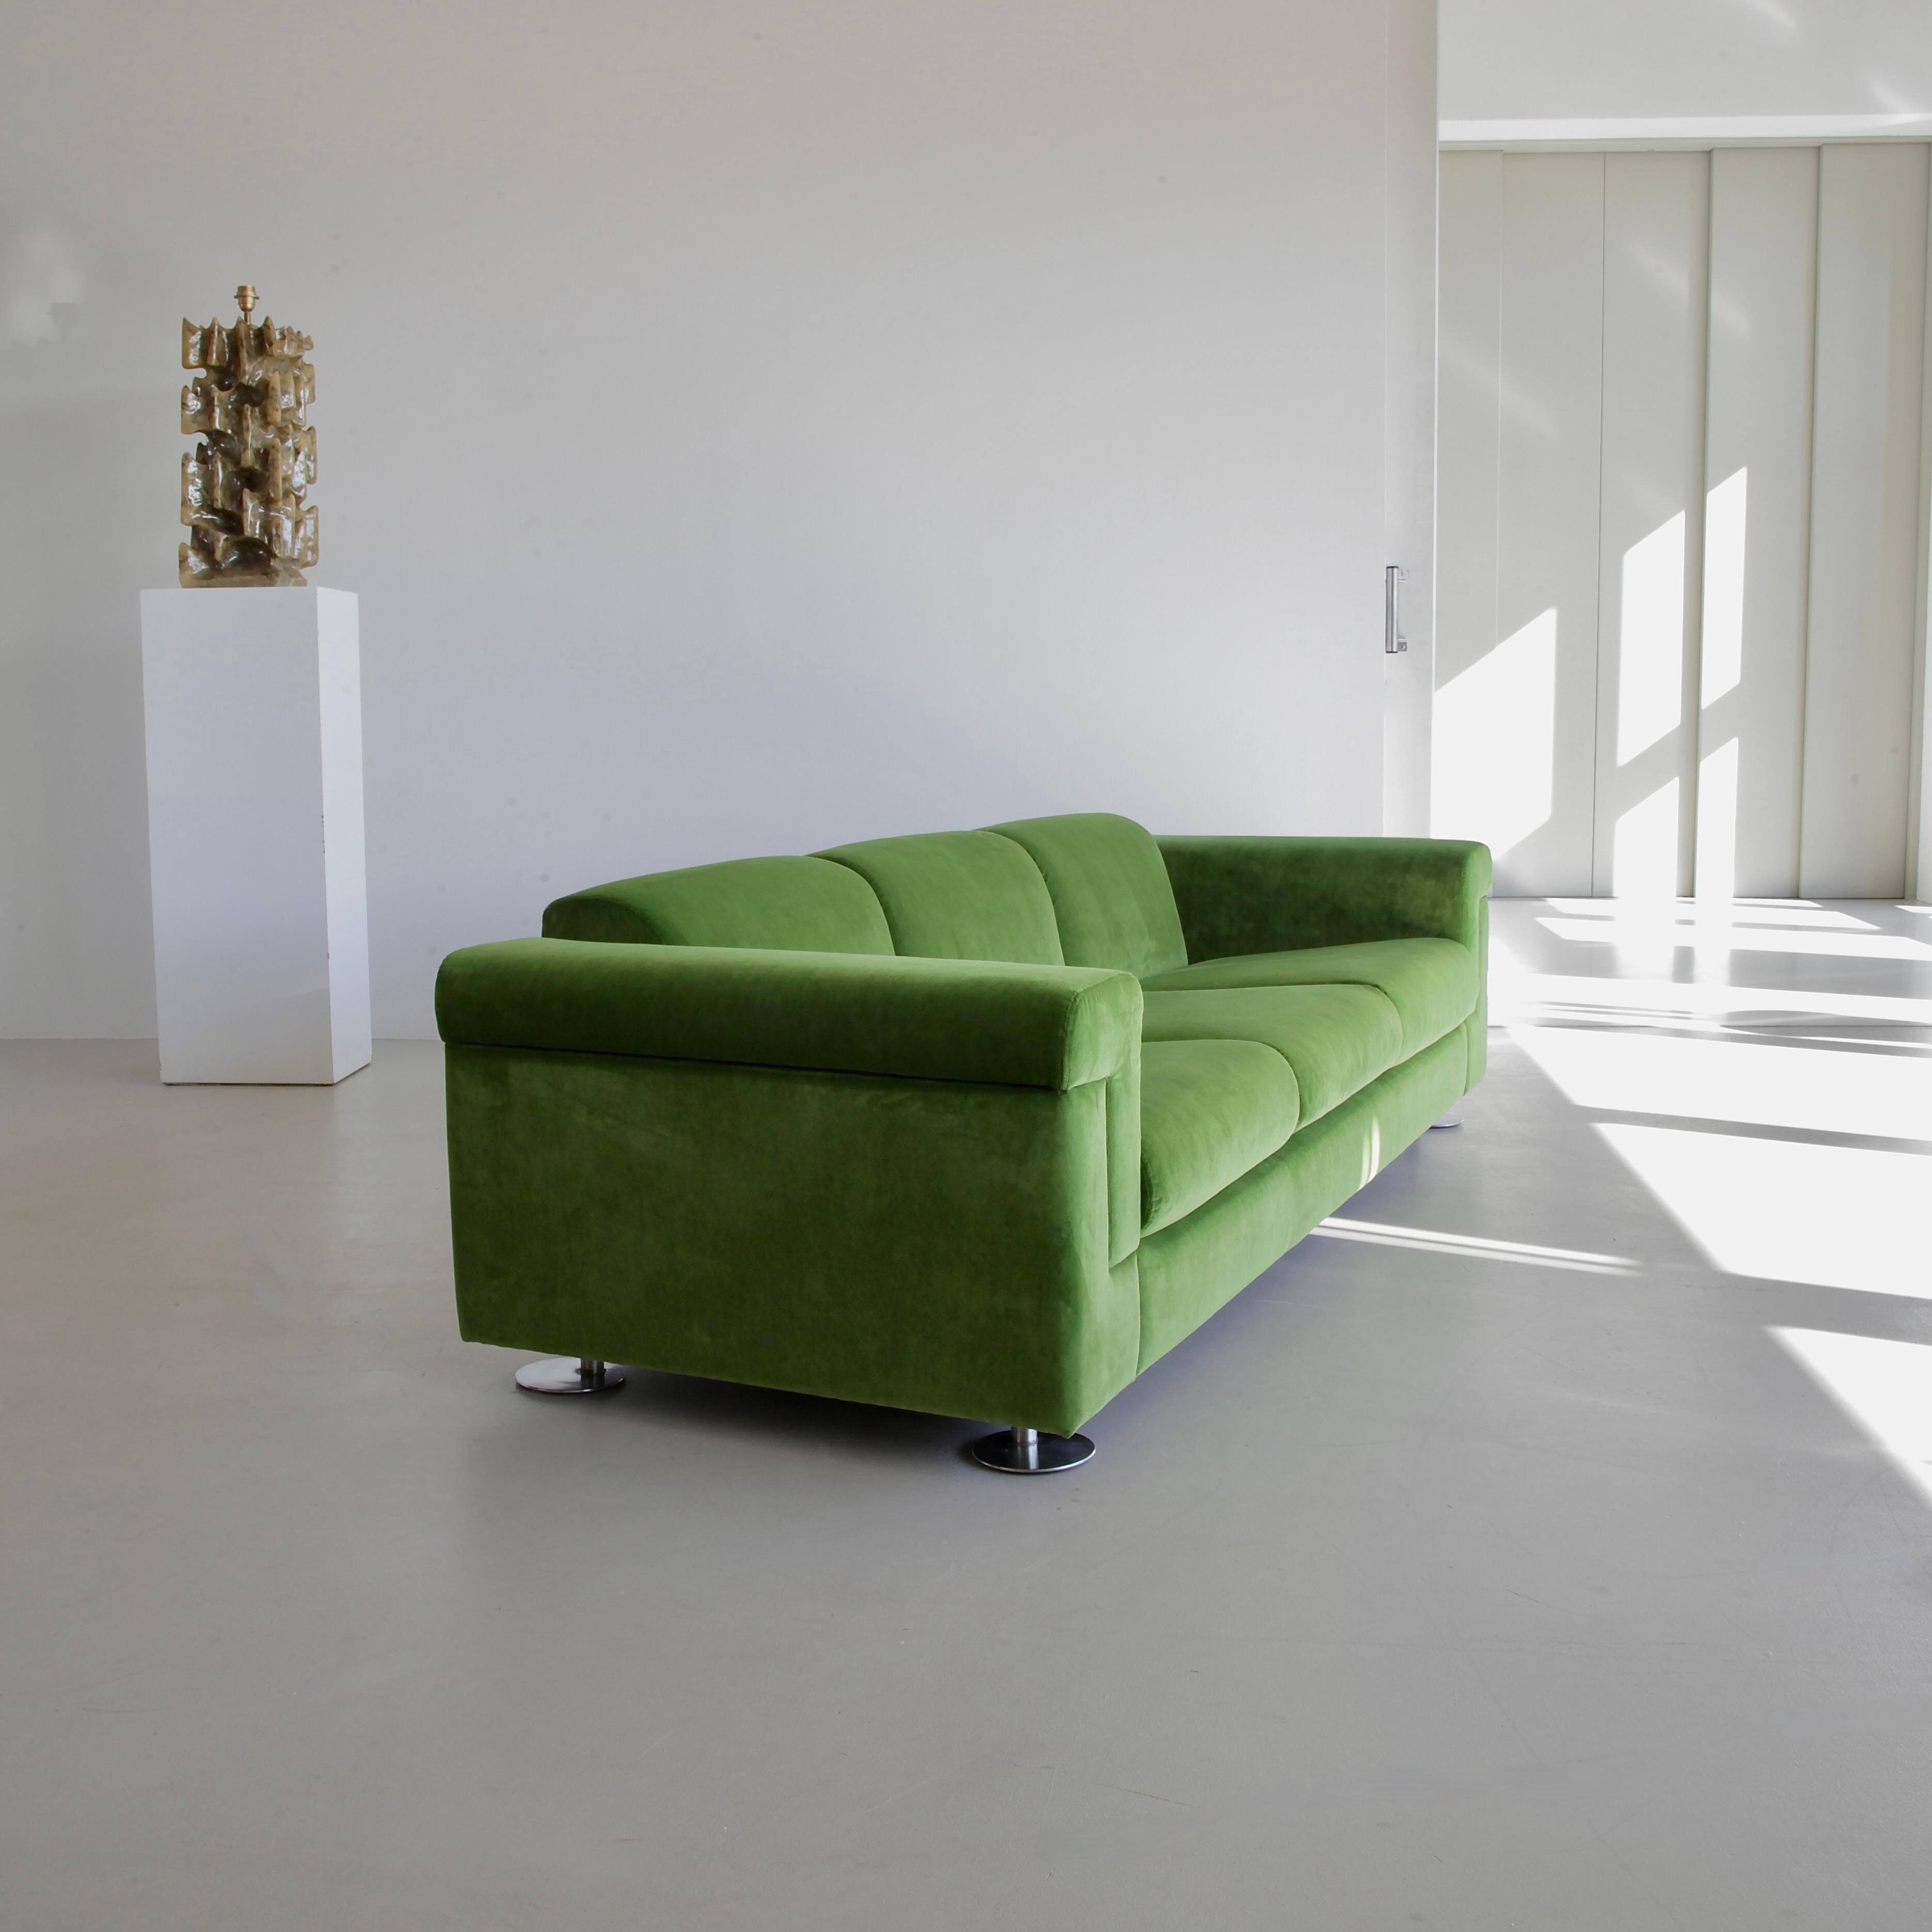 Three-seat sofa designed by Valeria Borsani and Alfredo Bonetti. Italy, Tecno, 1966.

Large sofa upholstered in green velvet designed by Tecno's Borsani and Bonetti in 1966. Polished metal feet appear retracted inwards with respect to the disk's